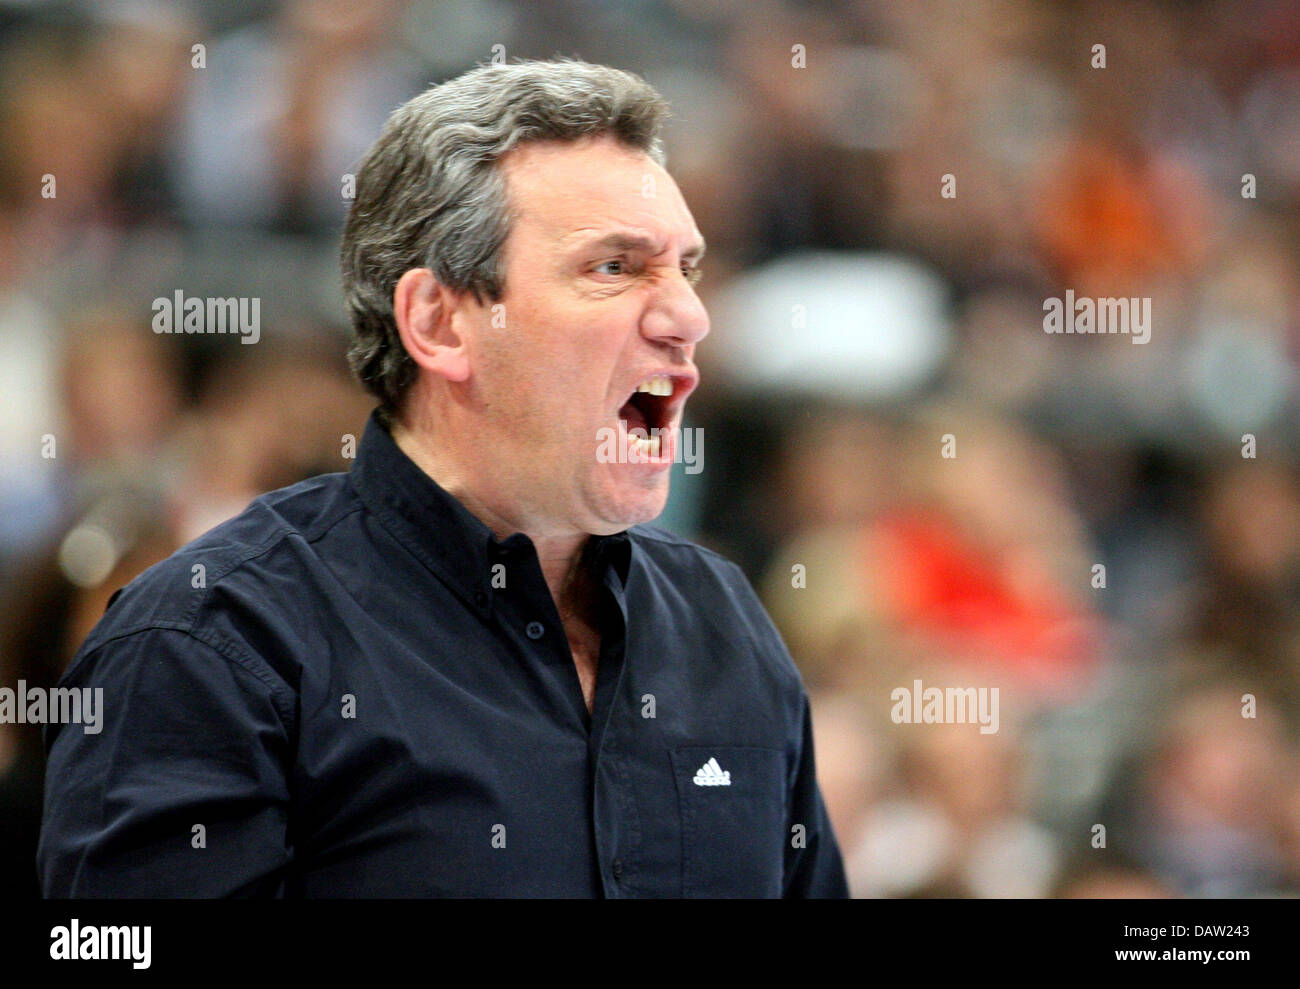 French head coach Claude Onesta adresses his players during the 2007 Germany Handball World Championships in Cologne, Germany, Sunday, 04 February 2007. Photo: Franz-Peter Tschauner Stock Photo